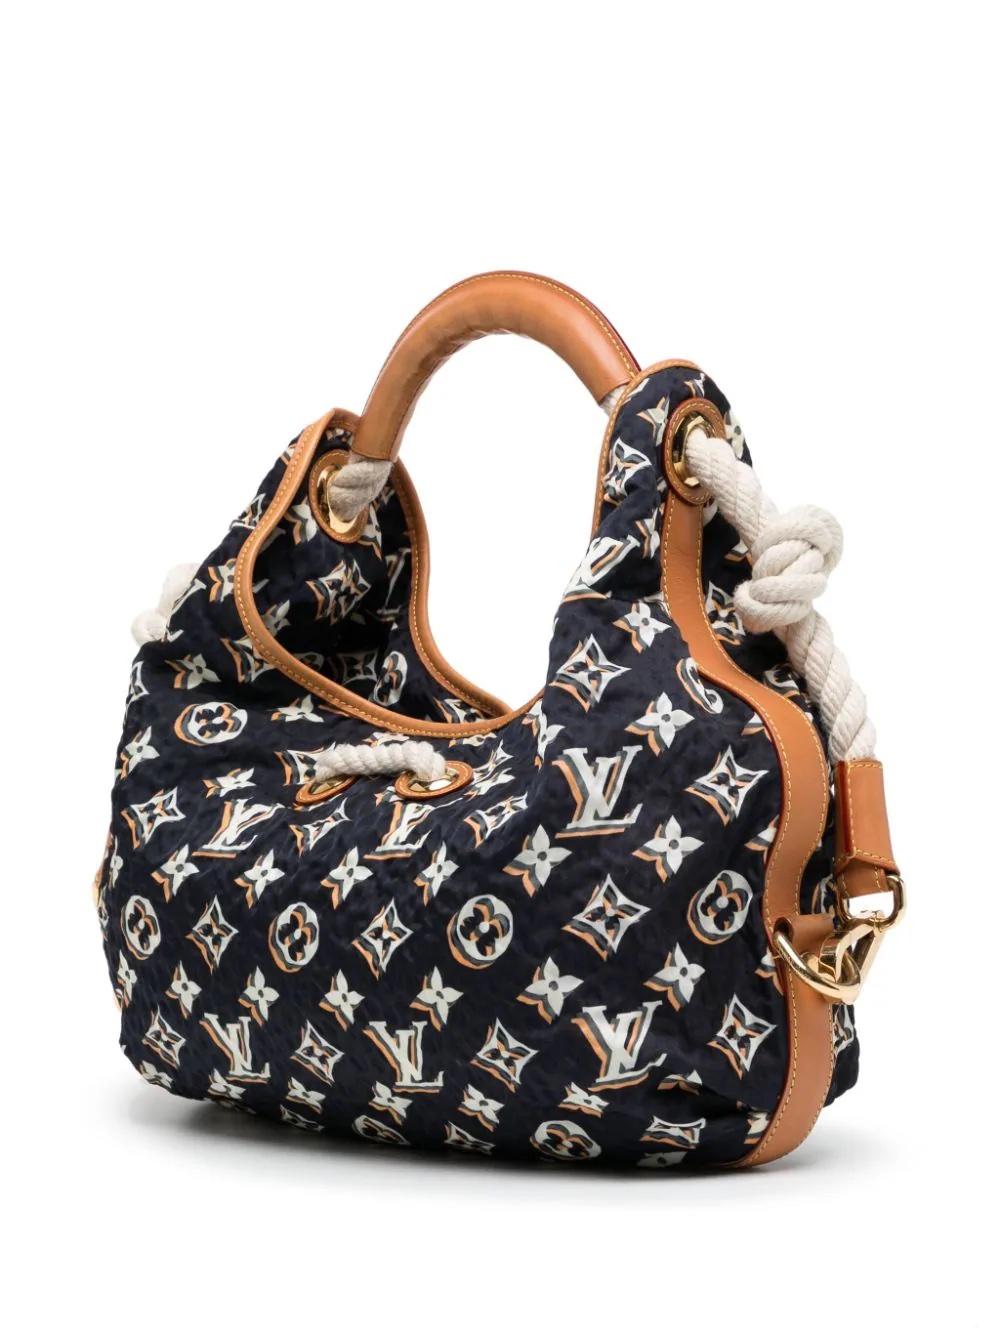 * From the 2010 cruise collection
* Navy blue/white/brown
* Leather trim
* Monogram print
* Gold-tone logo plaque
* Rope detailing
* Single rolled top handle
* Drawstring fastening
* Press-stud fastening
* Internal zip-fastening pocket
* Very Good